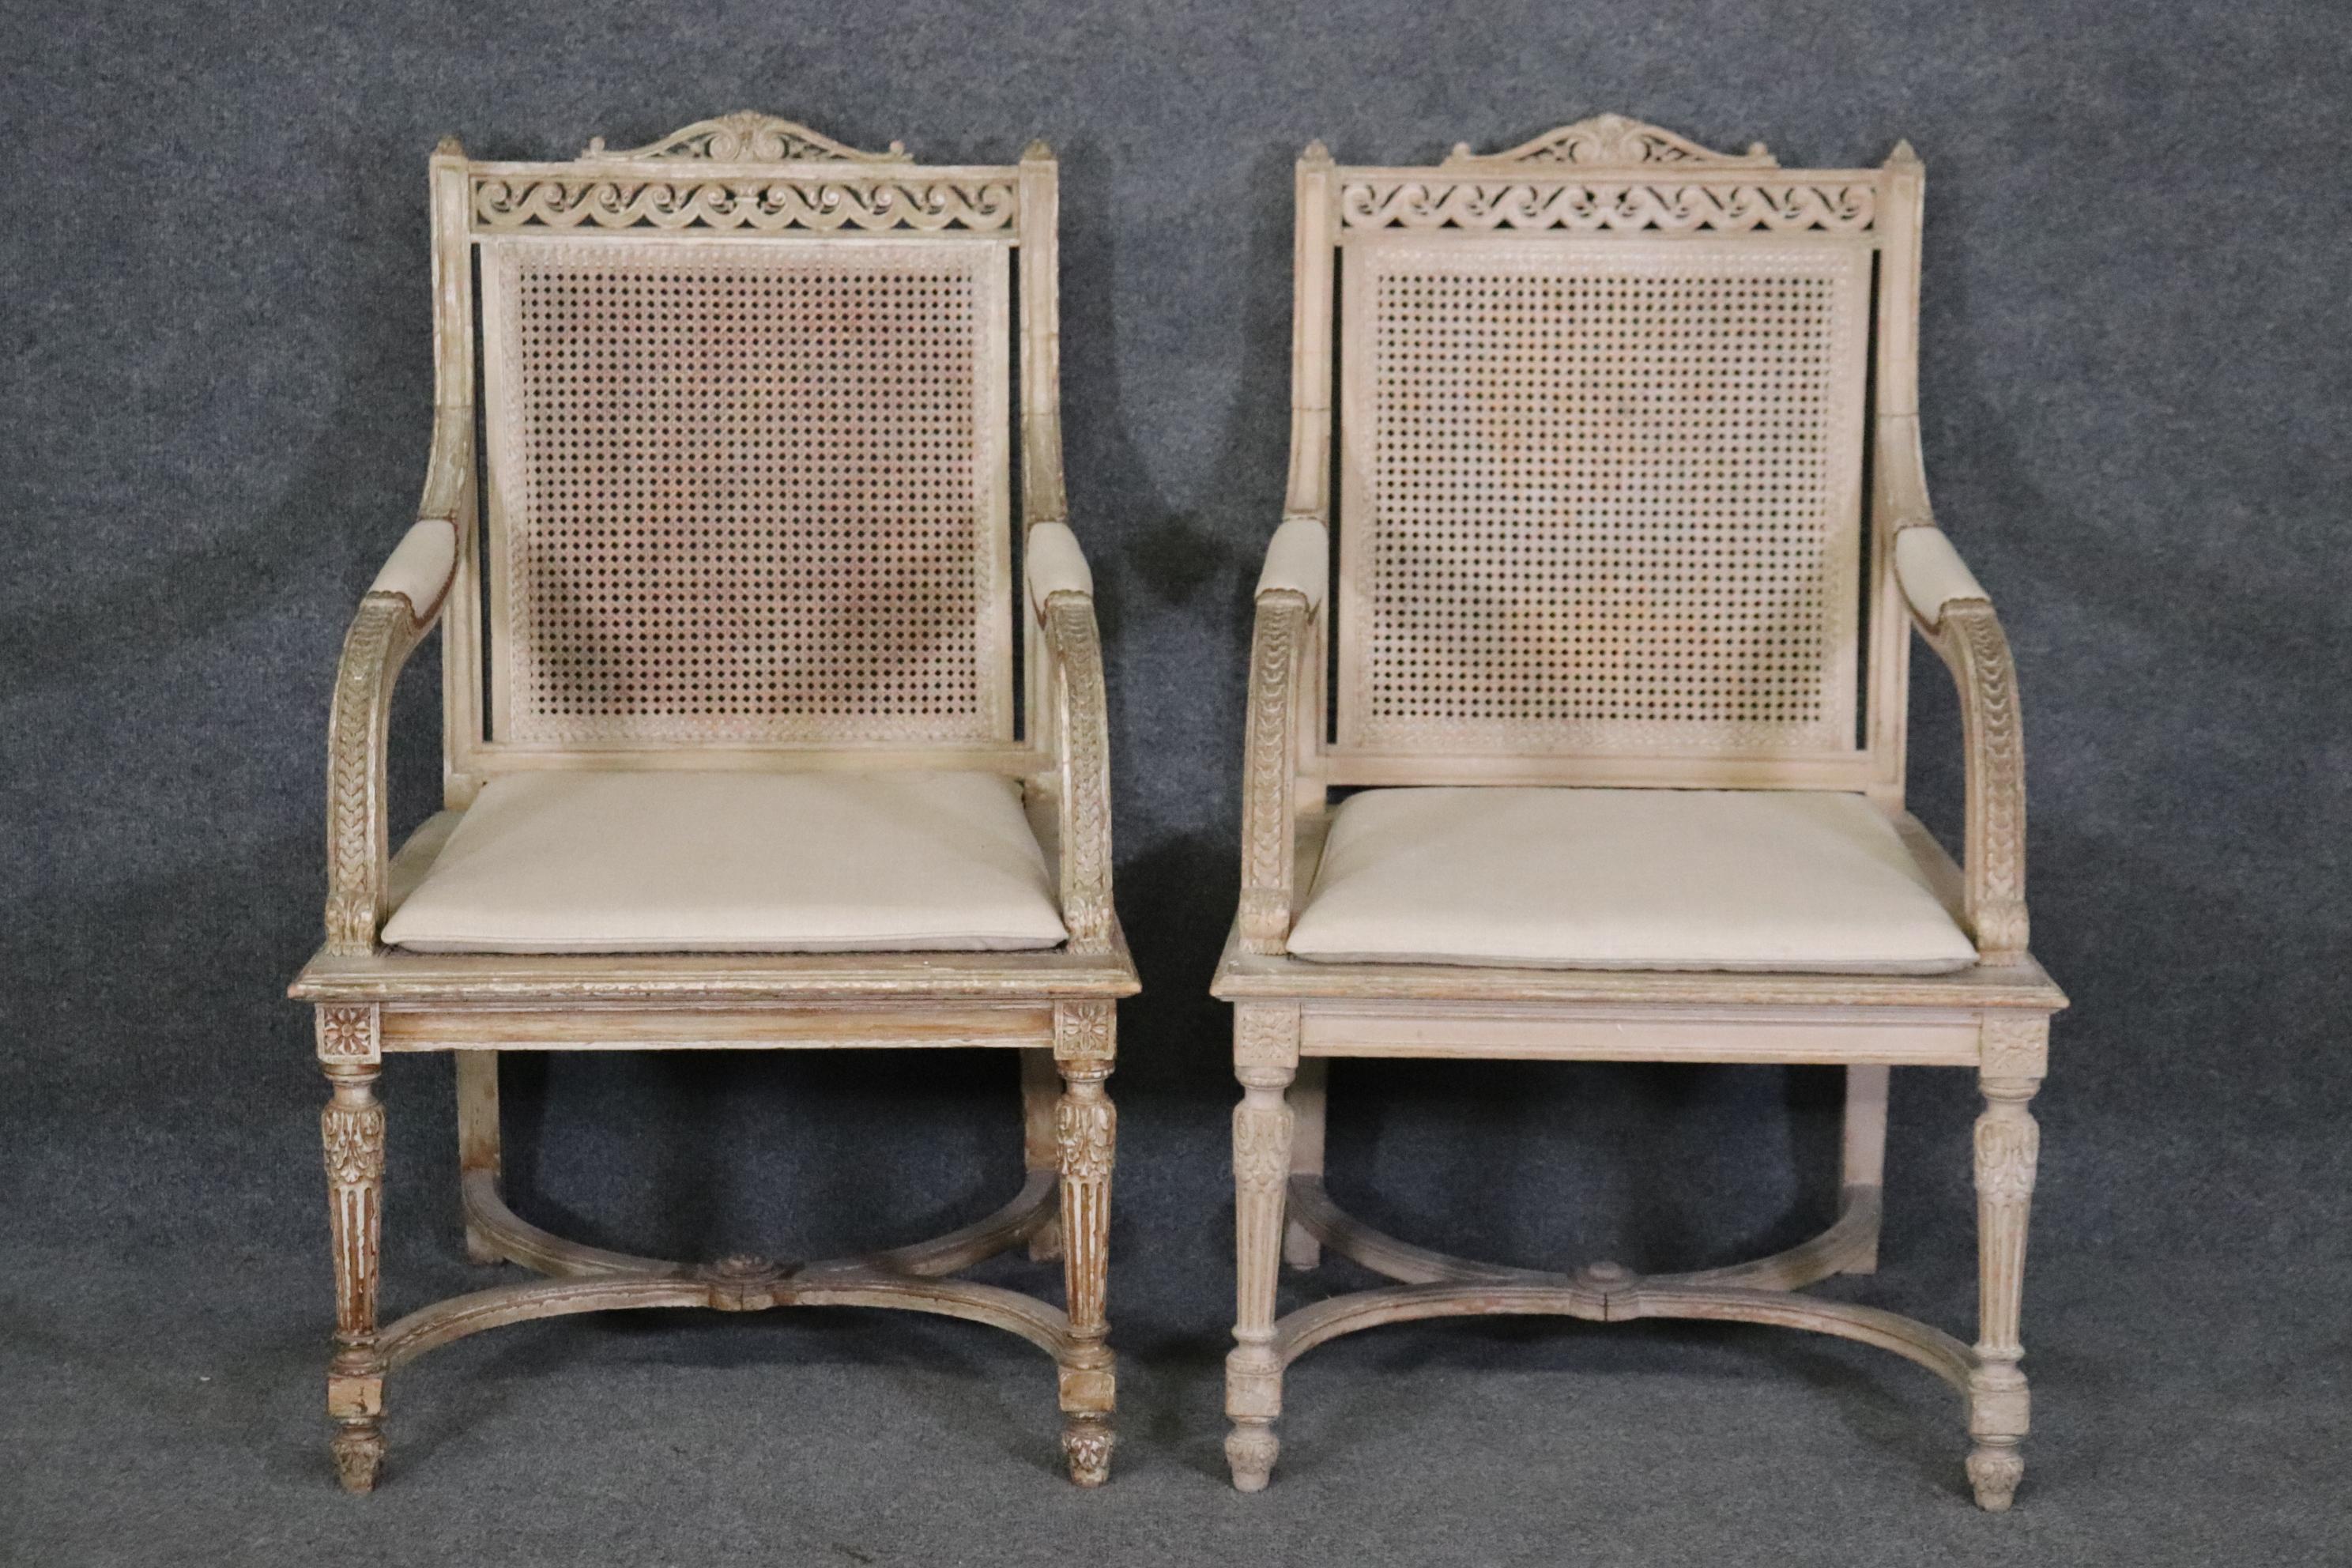   Pair of Cane Back Antique White Paint Decorated Louis XVI Style Armchairs Dini In Good Condition For Sale In Swedesboro, NJ